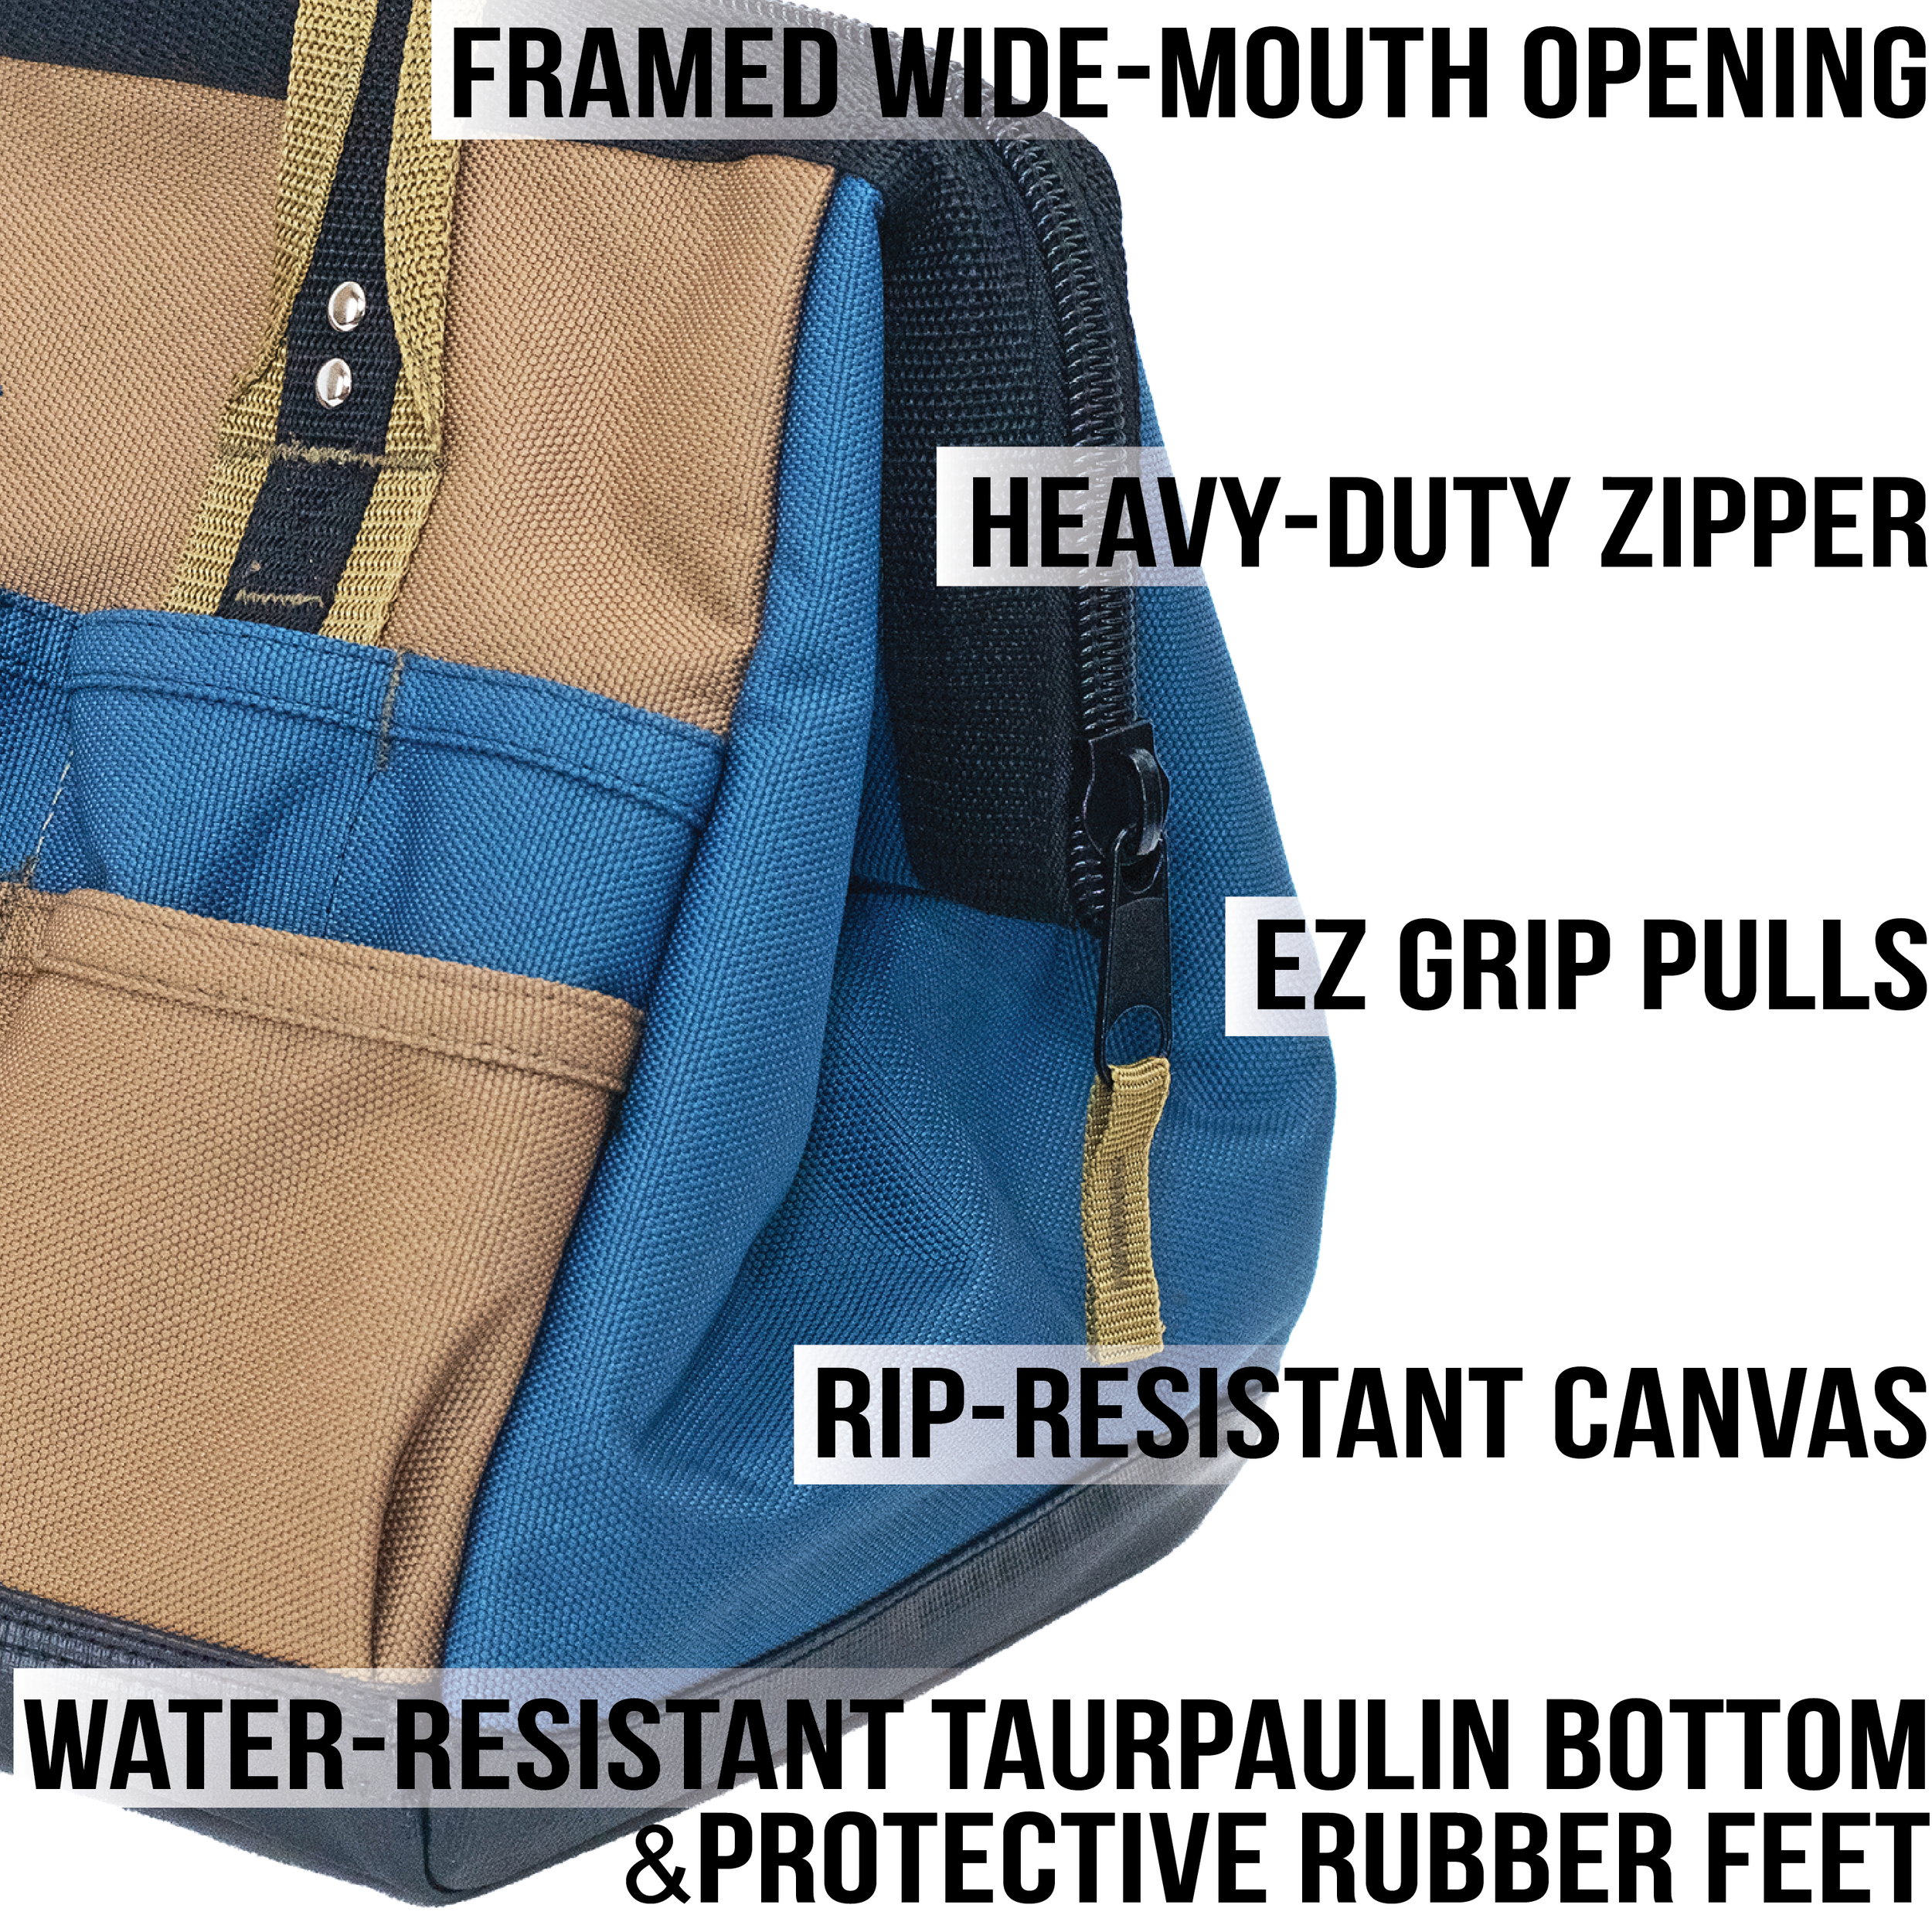 Rugged Tools Wide-Mouth Tool Bag Listing7.png